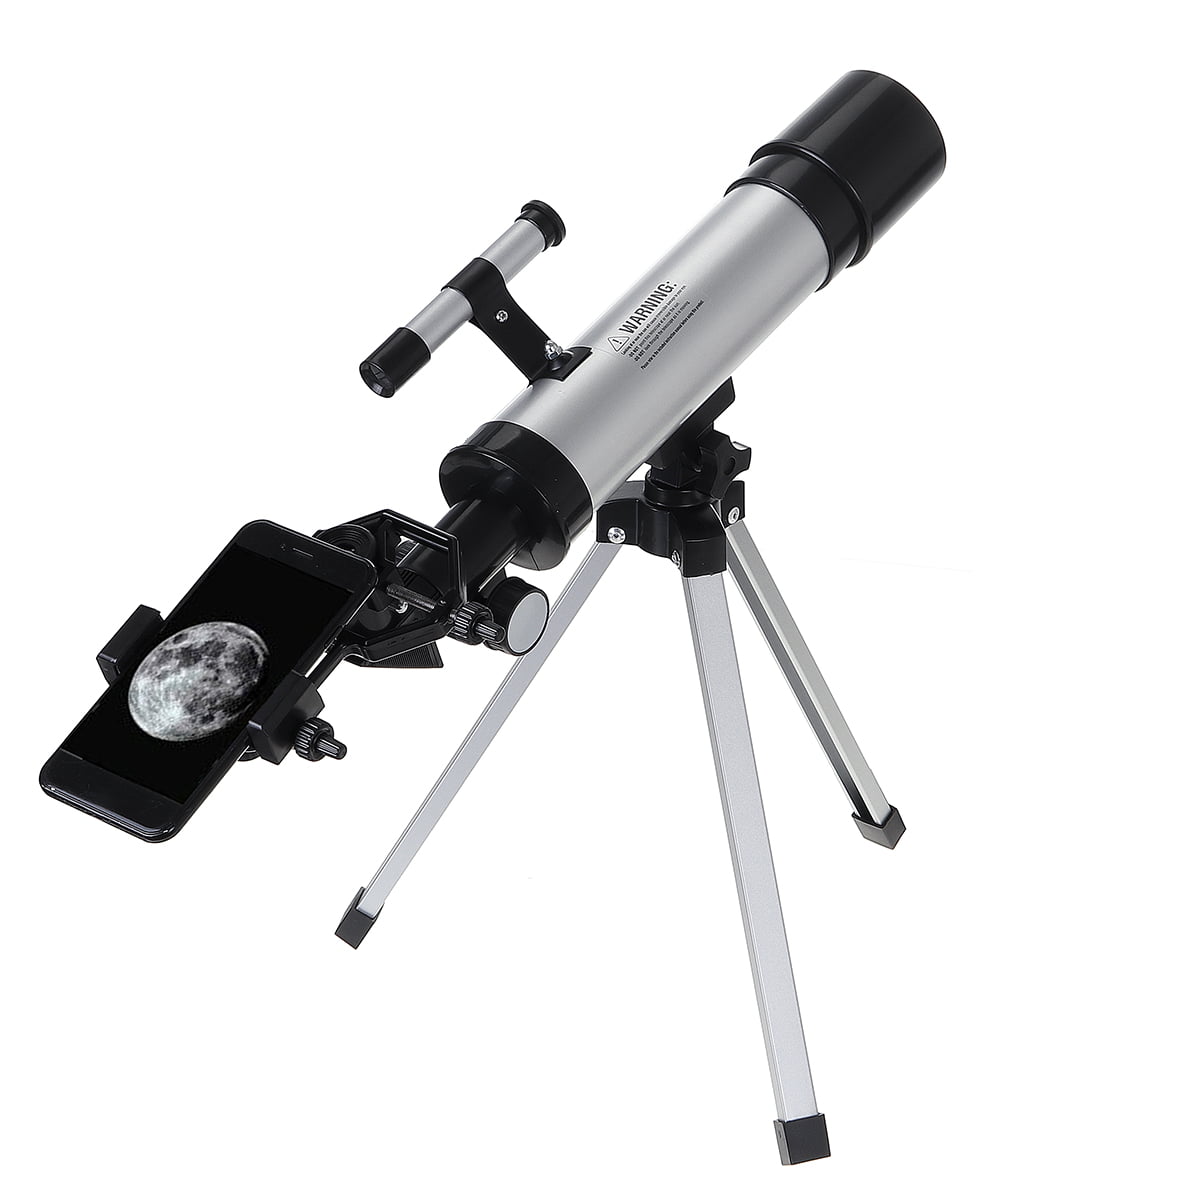 RYGHEWE Telescopes for Astronomy Beginners,with Tabletop Tripod Finder Clip For Universal and 2 Eyepieces Stargazing High Magnification High Definition Telescopes,Educational Astronomical Toy for Kids 